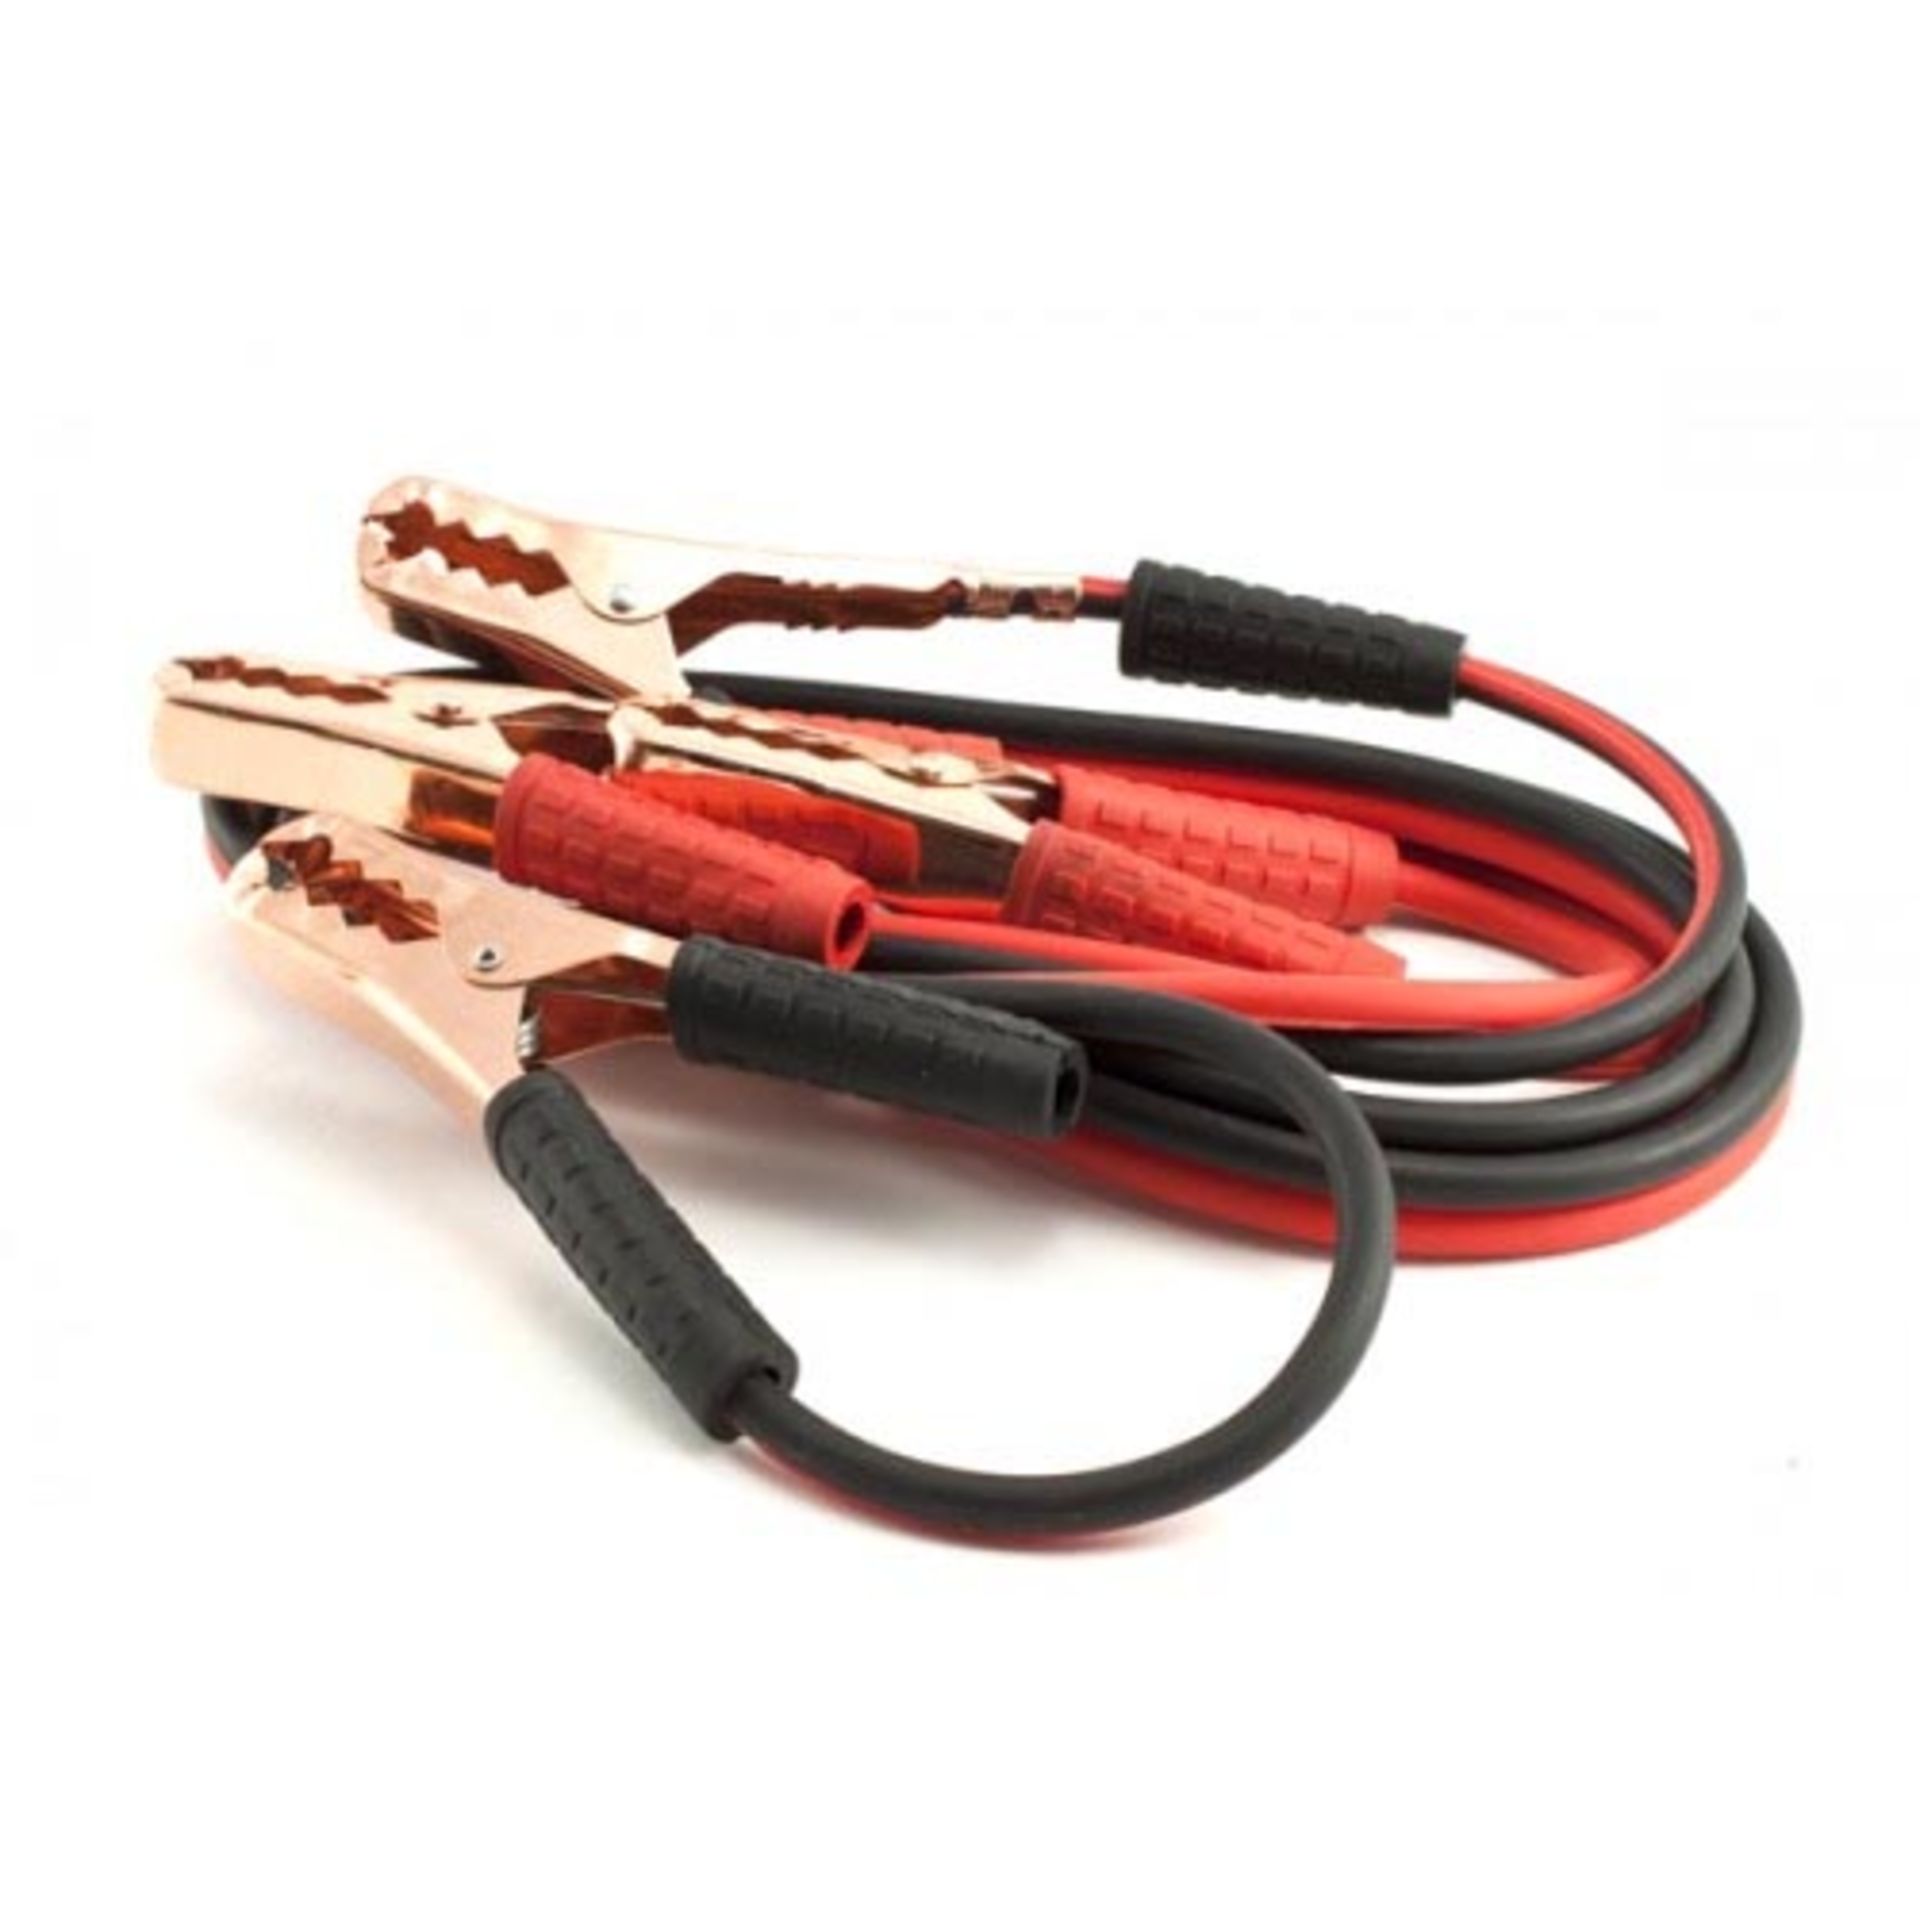 V Brand New 200AMP Booster Cables